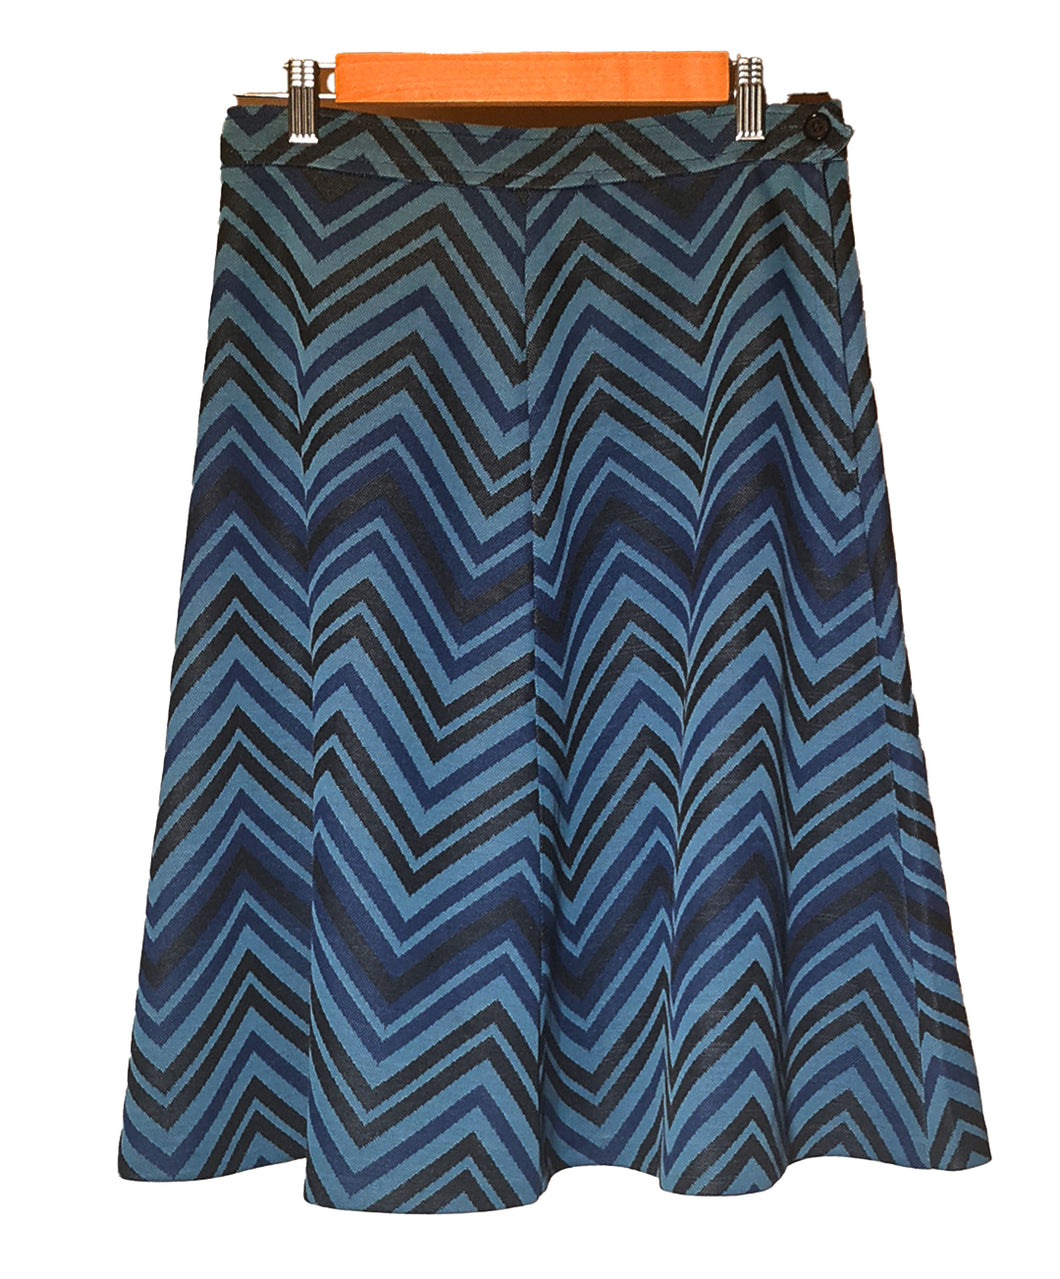 70s Shades of Blue Zigzag A-Line Skirt